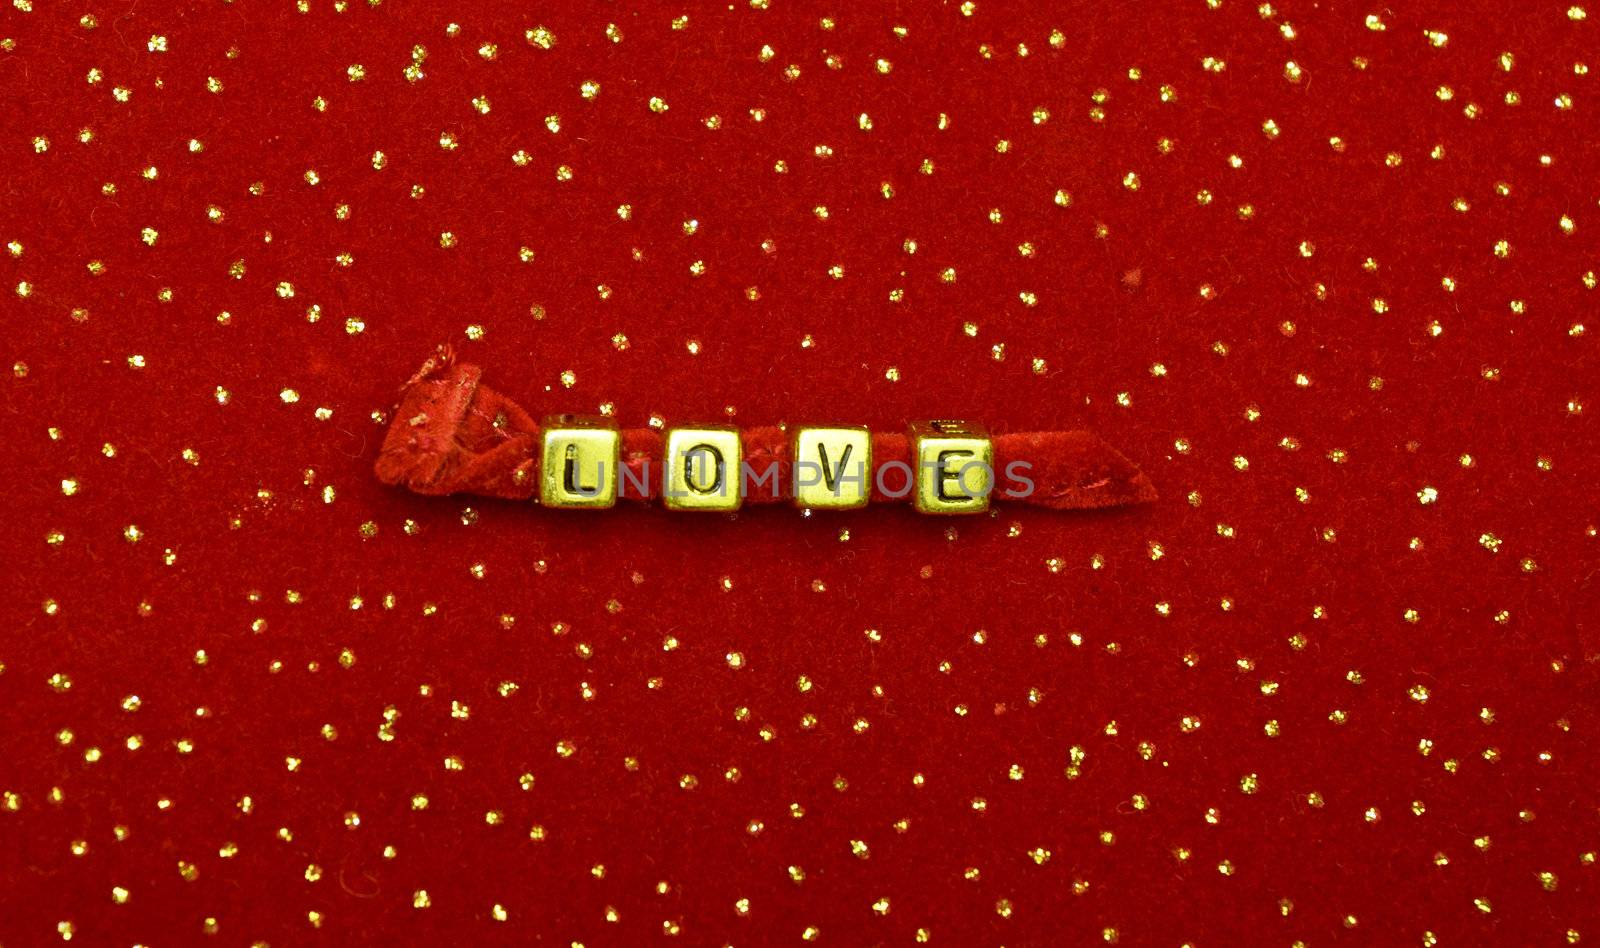 photo of word of love beads on red velvet with sequins